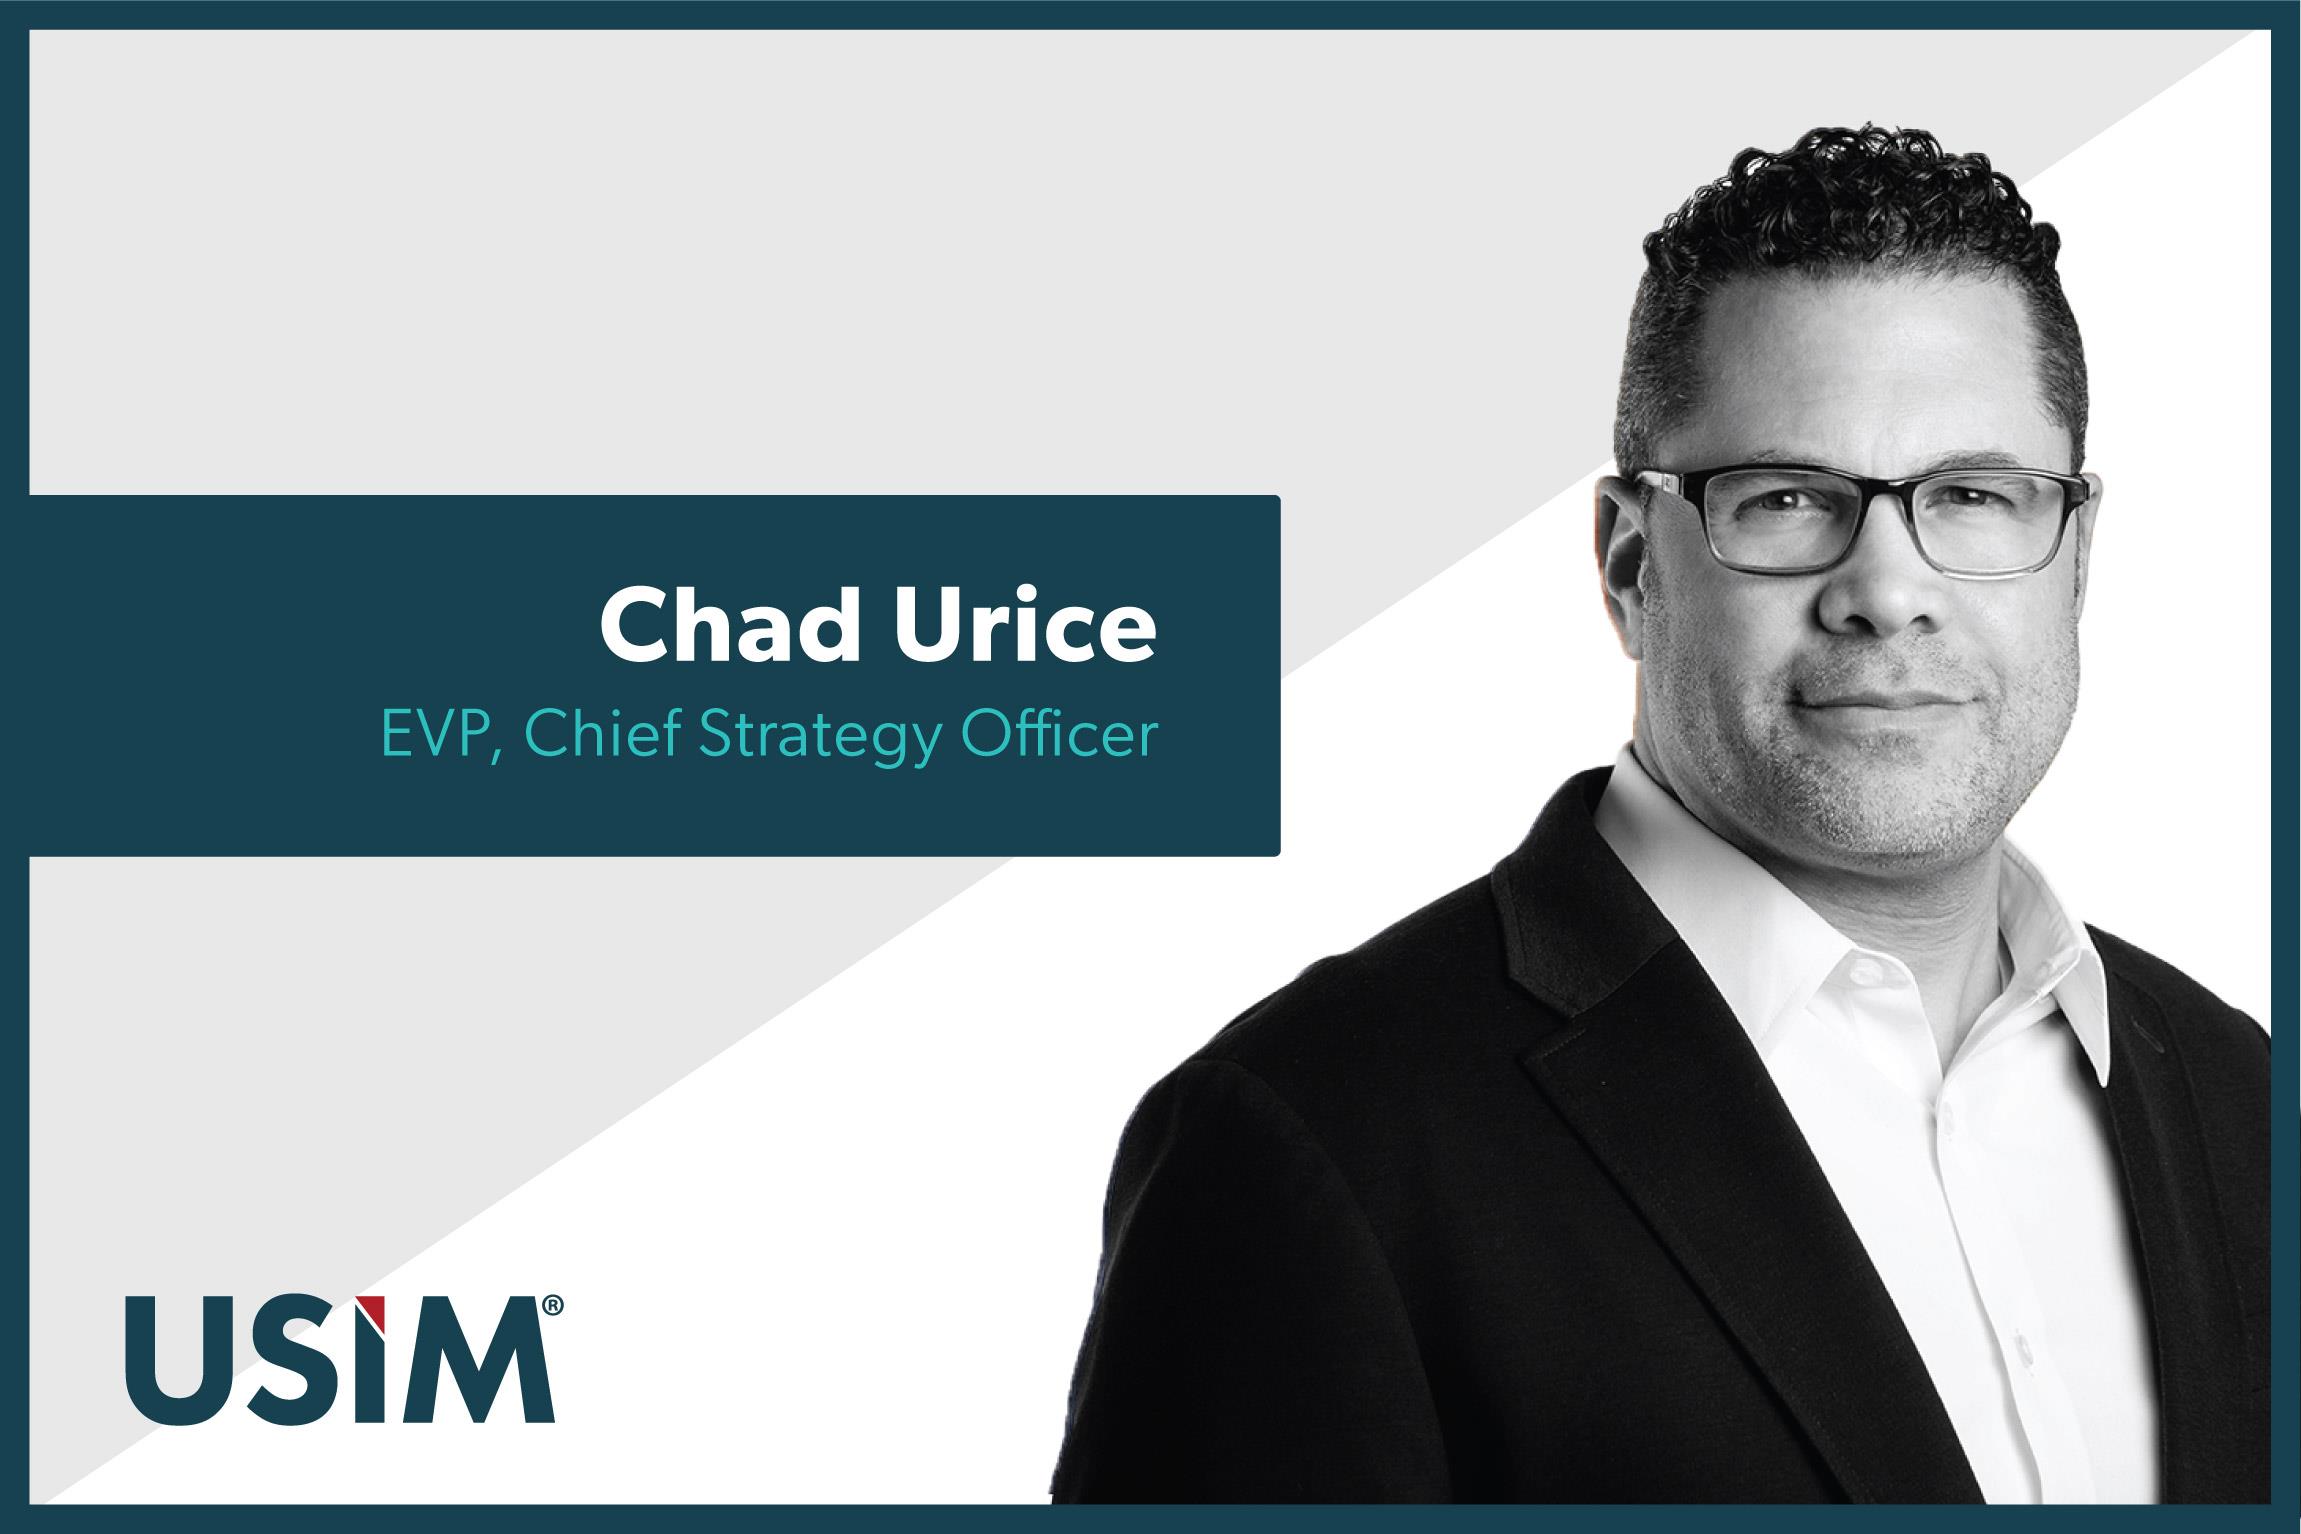 USIM Appoints Chad Urice as New Executive Vice President, Chief Strategy Officer